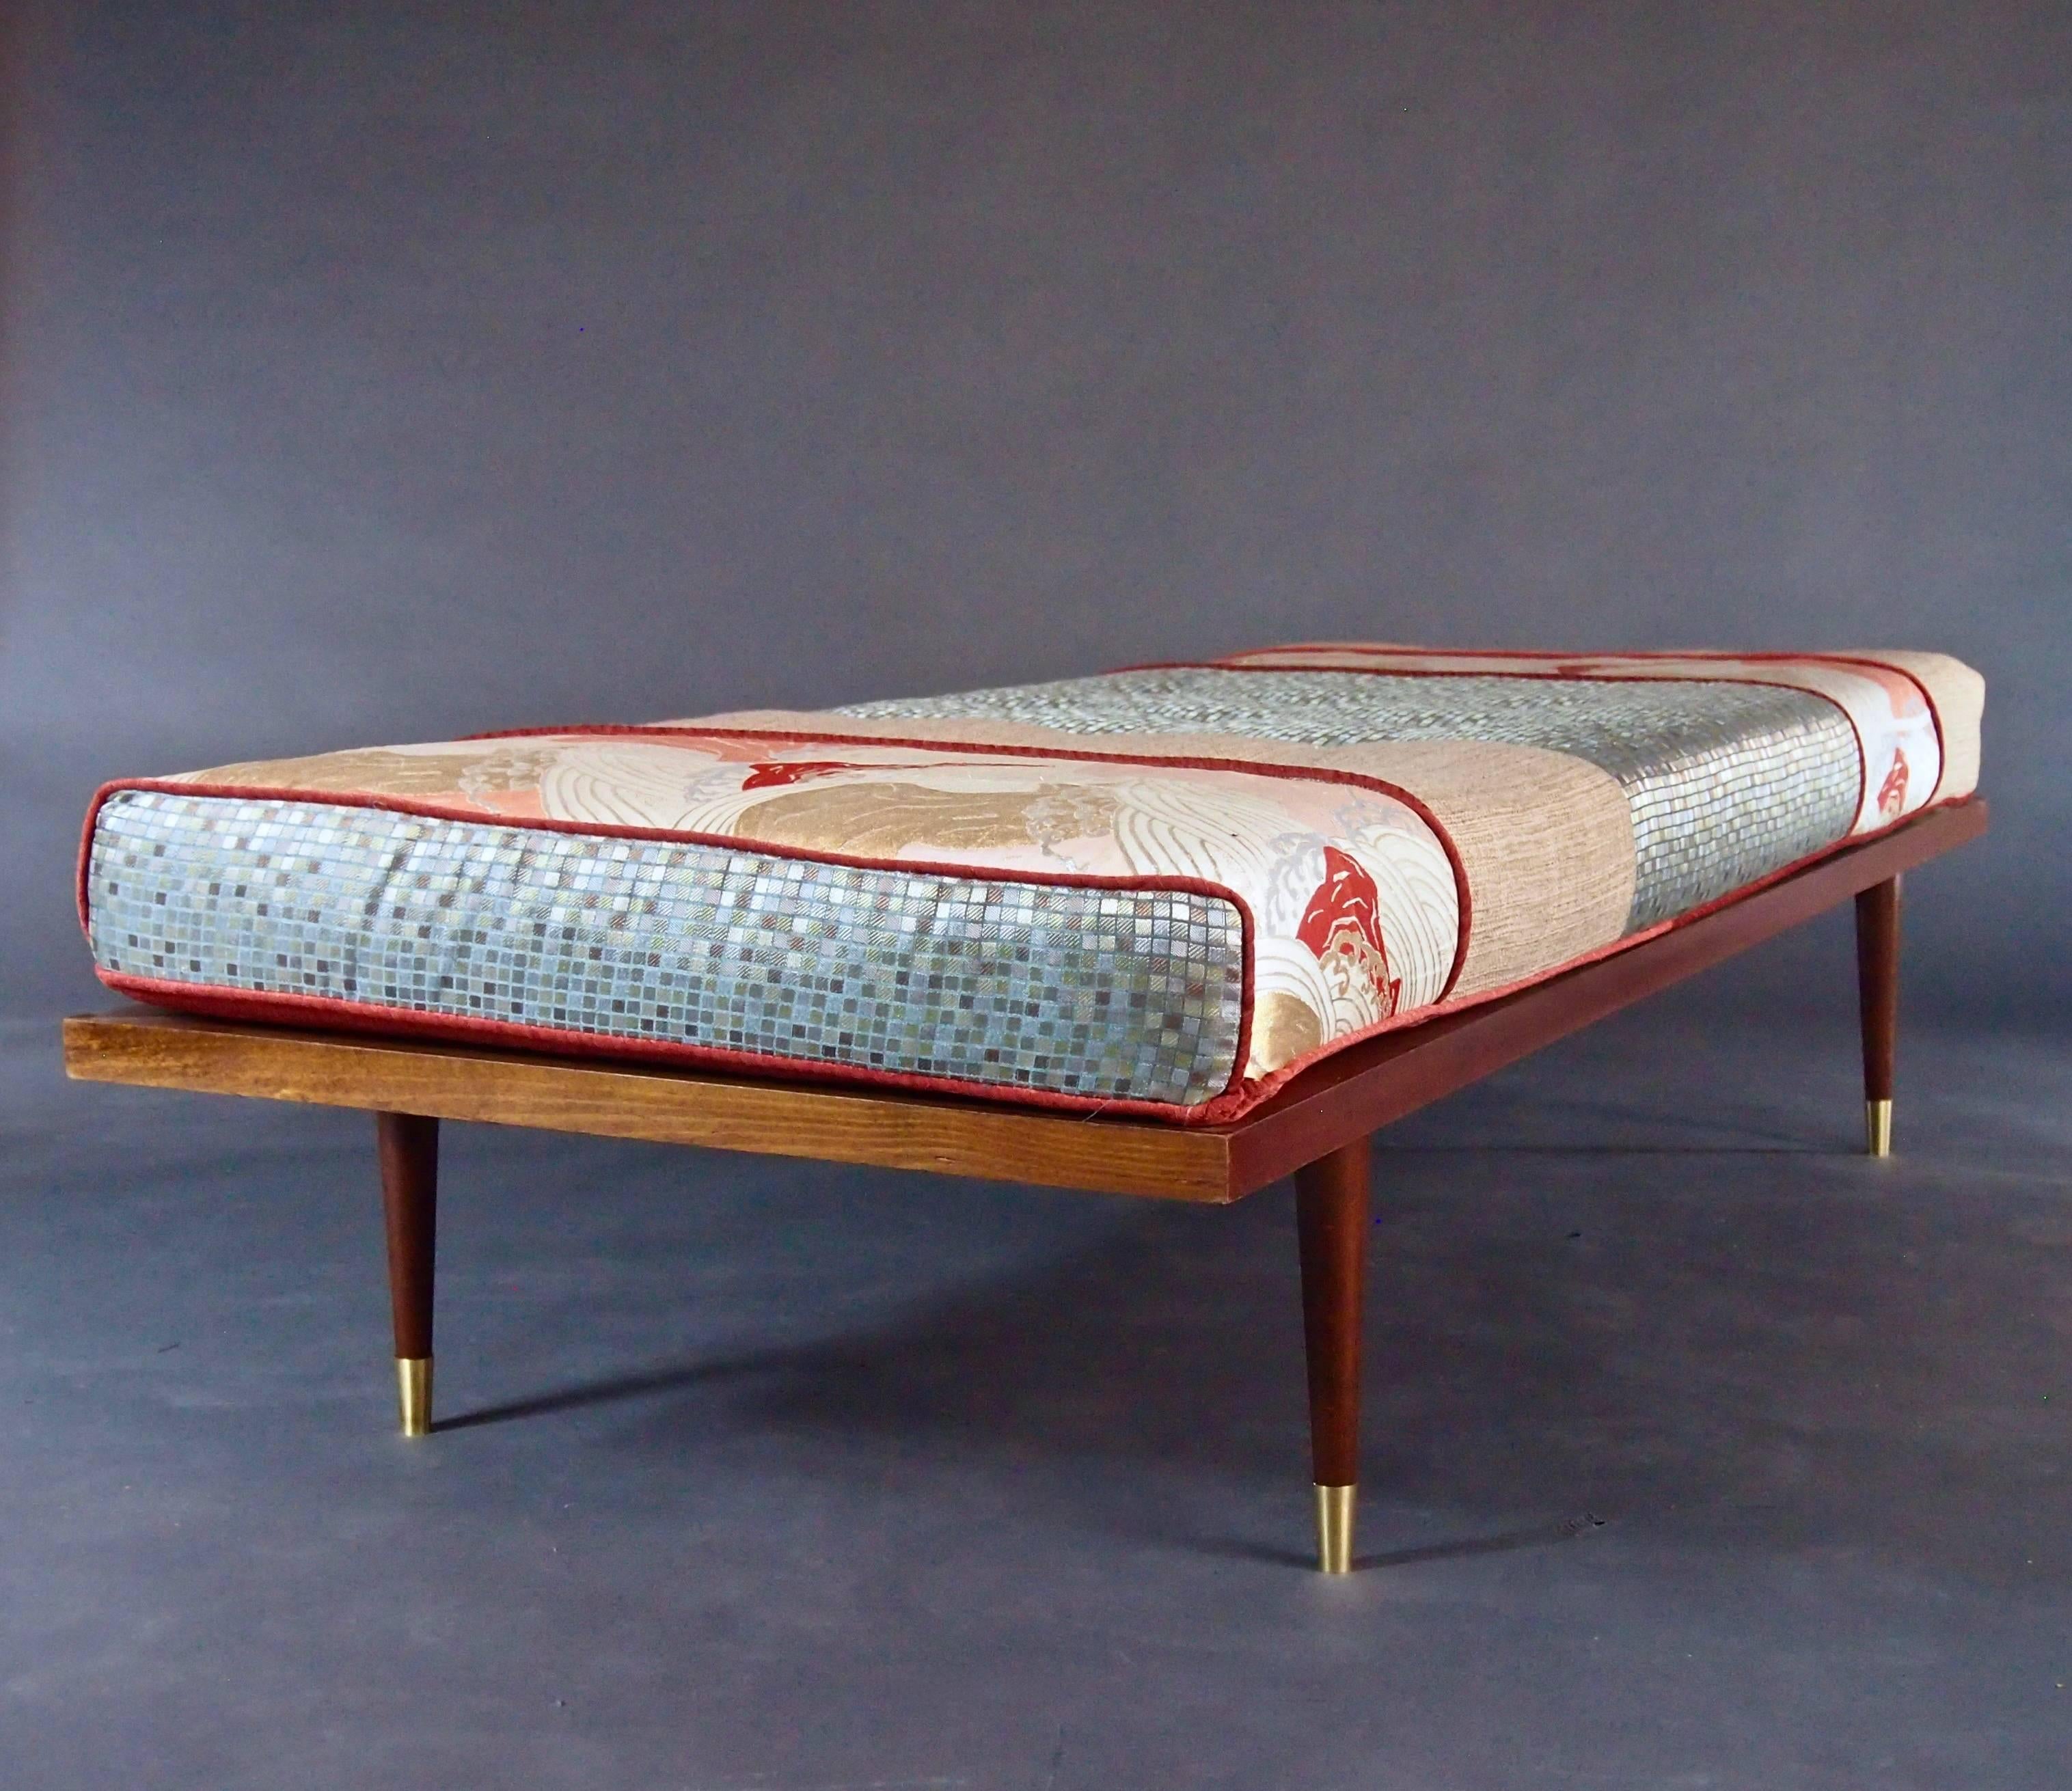 Spanning east and west, this Mid-Century daybed is a beautiful piece of artistry. It uses an authentic, vintage obi (the waist tie from a kimono) to tell the story of a volcano in gorgeous gold, silver, maroon and cantaloupe handwoven silk. Accented